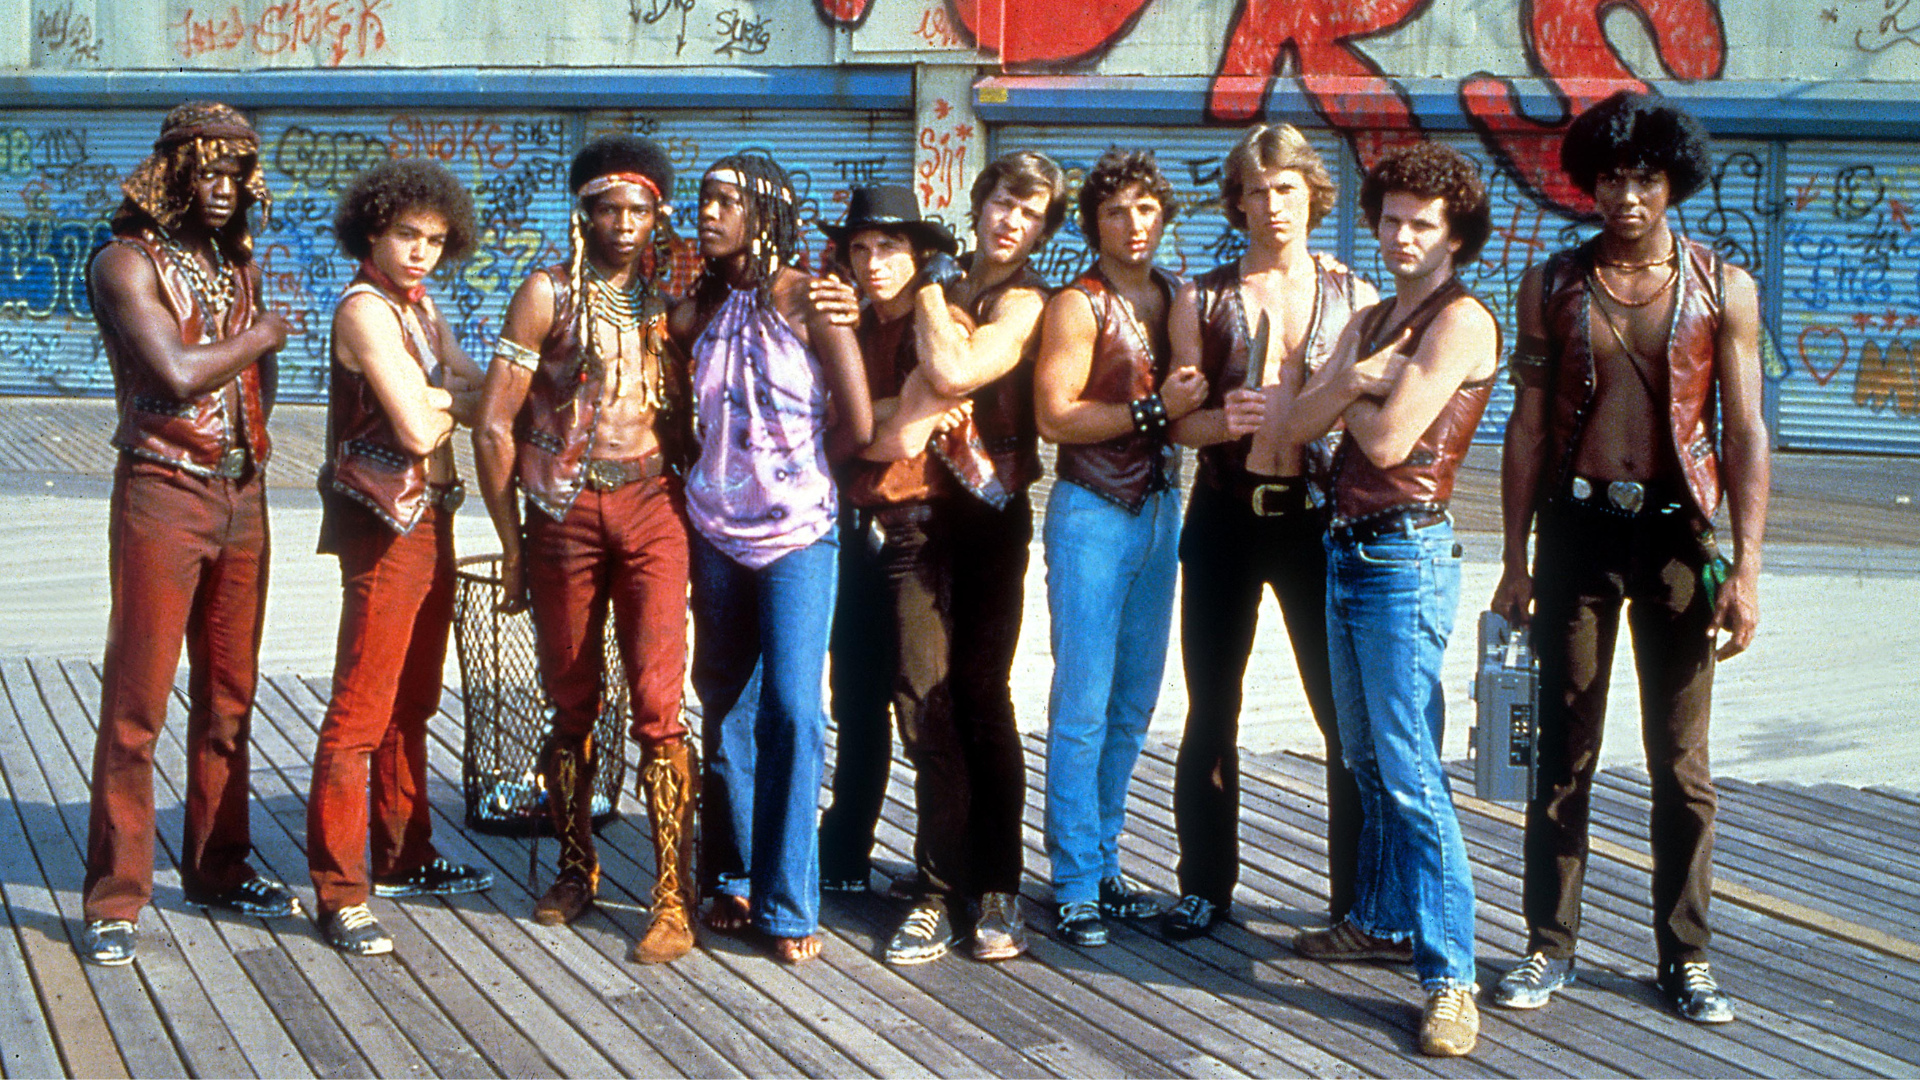 A gang of young men stand on the Coney Island boardwalk. All are dressed in red slacks and leather vests with no shirts. 